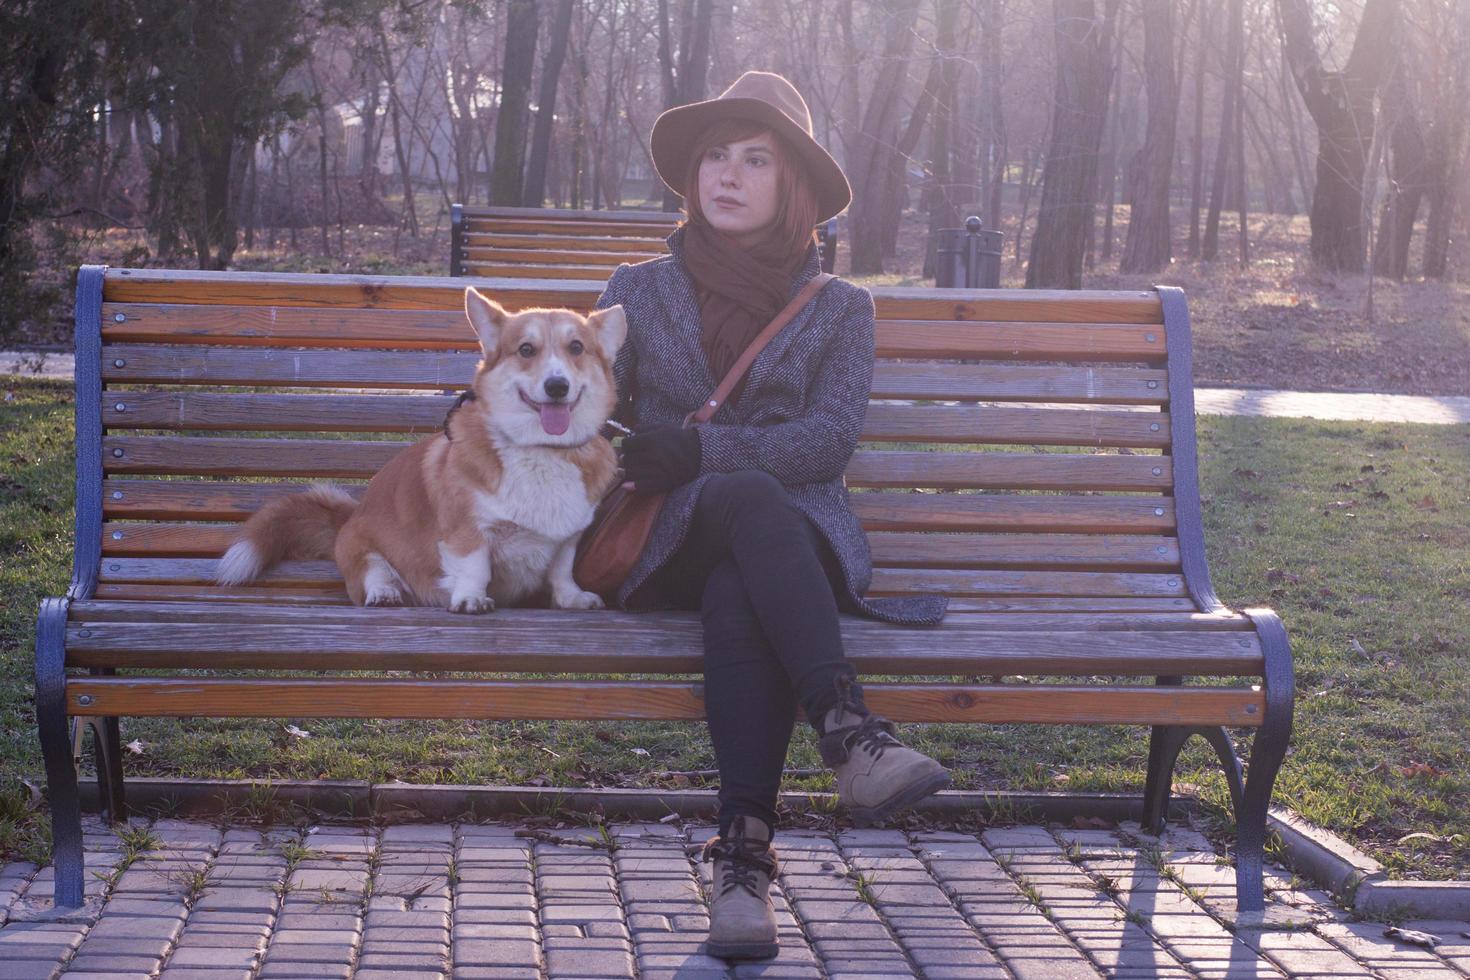 young woman in hat in park walk with cute corgi dog, sunny autumn day photo